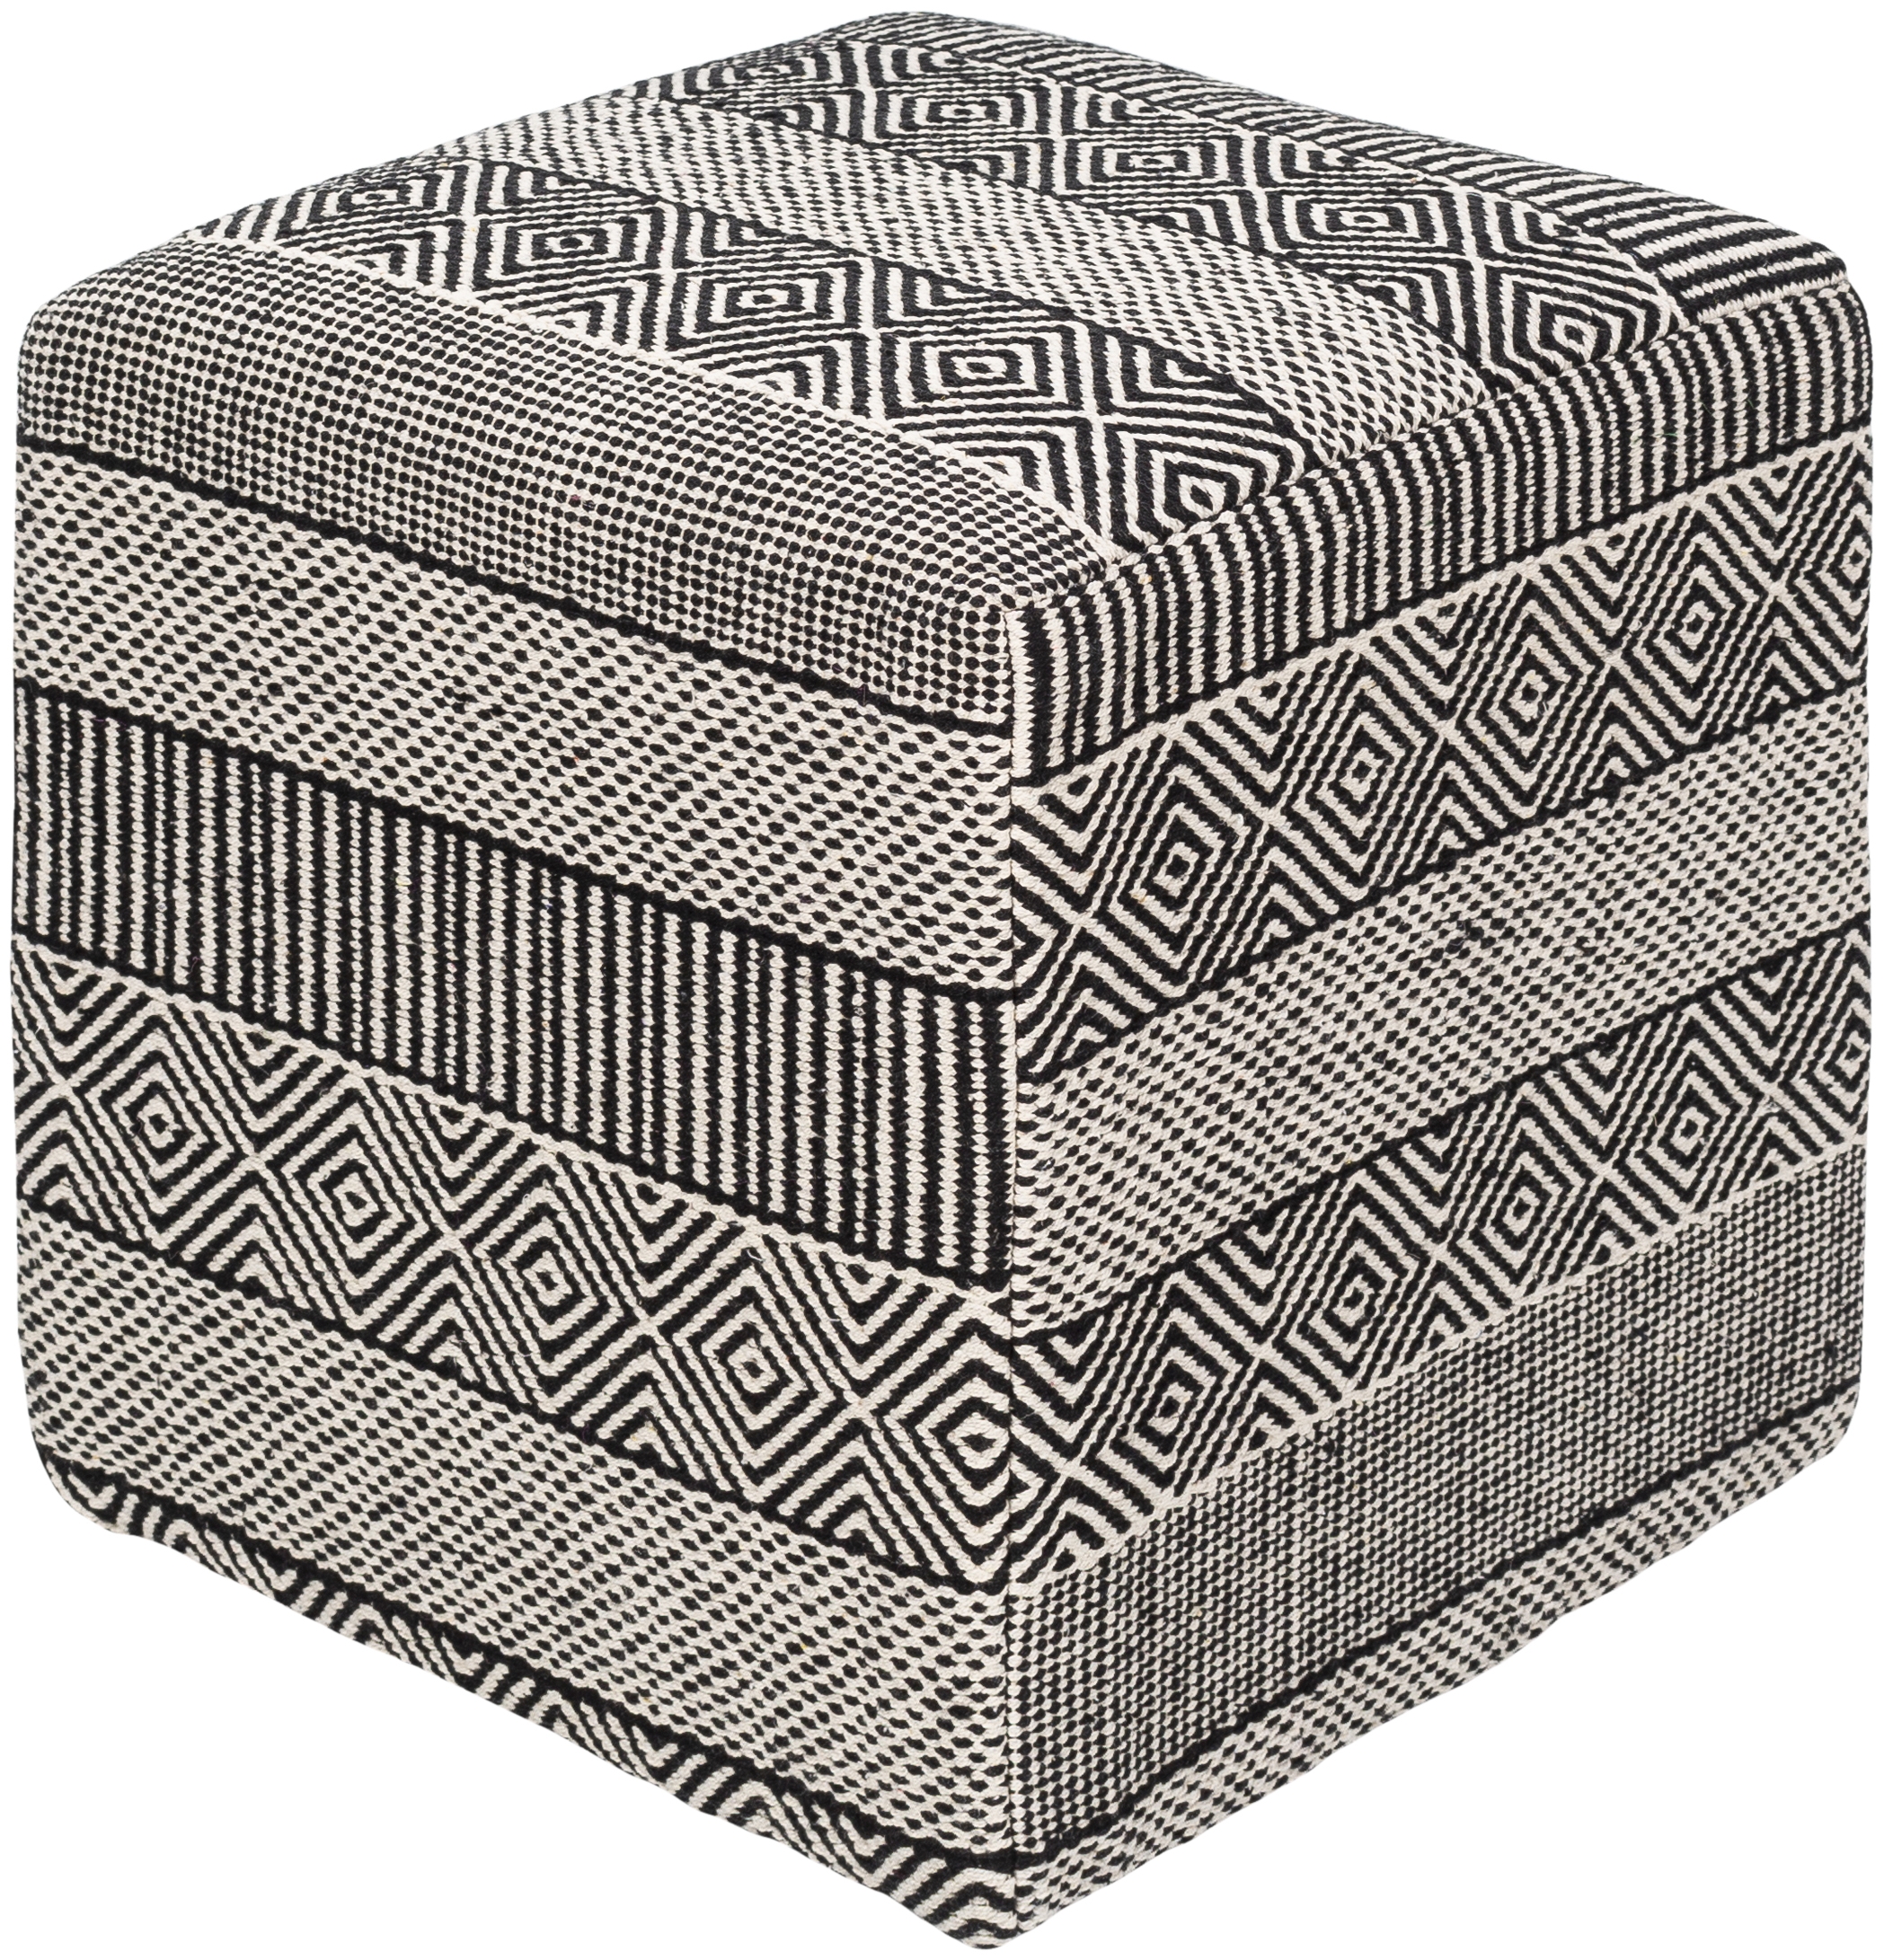 Ryder Woven Pouf - Image 0